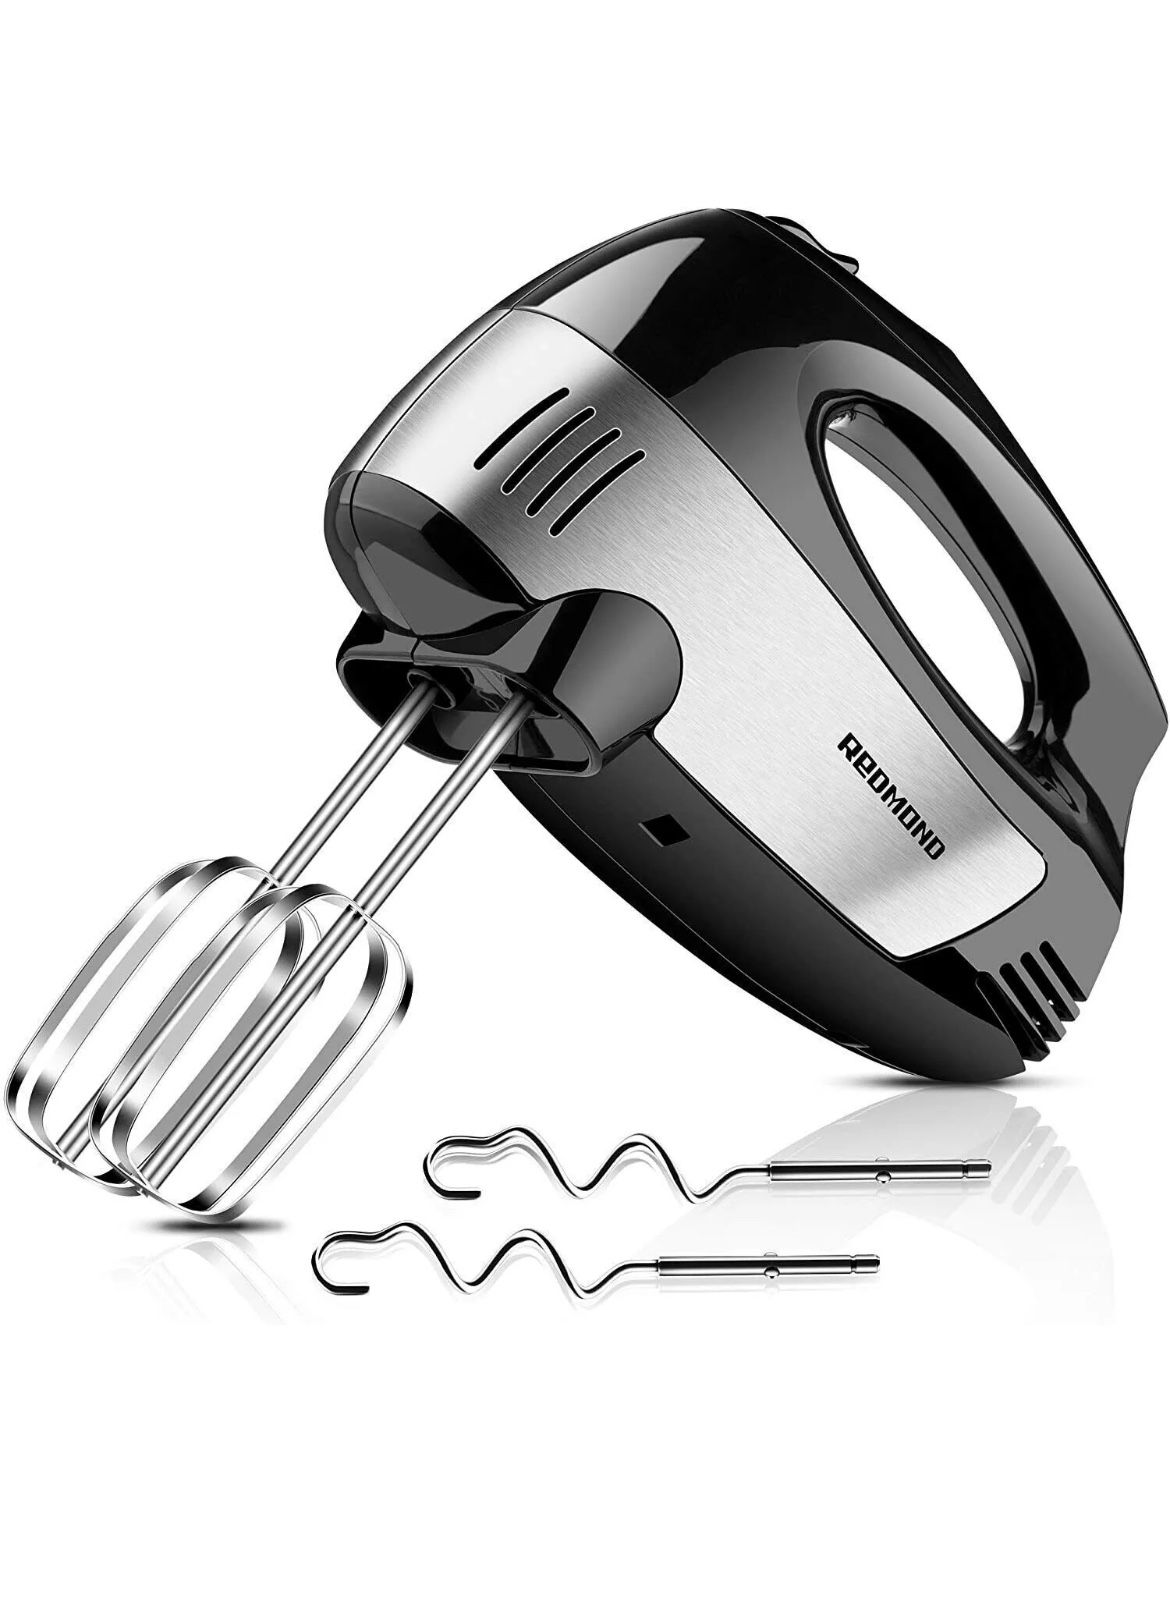 NEW Hand Mixer With Attachments